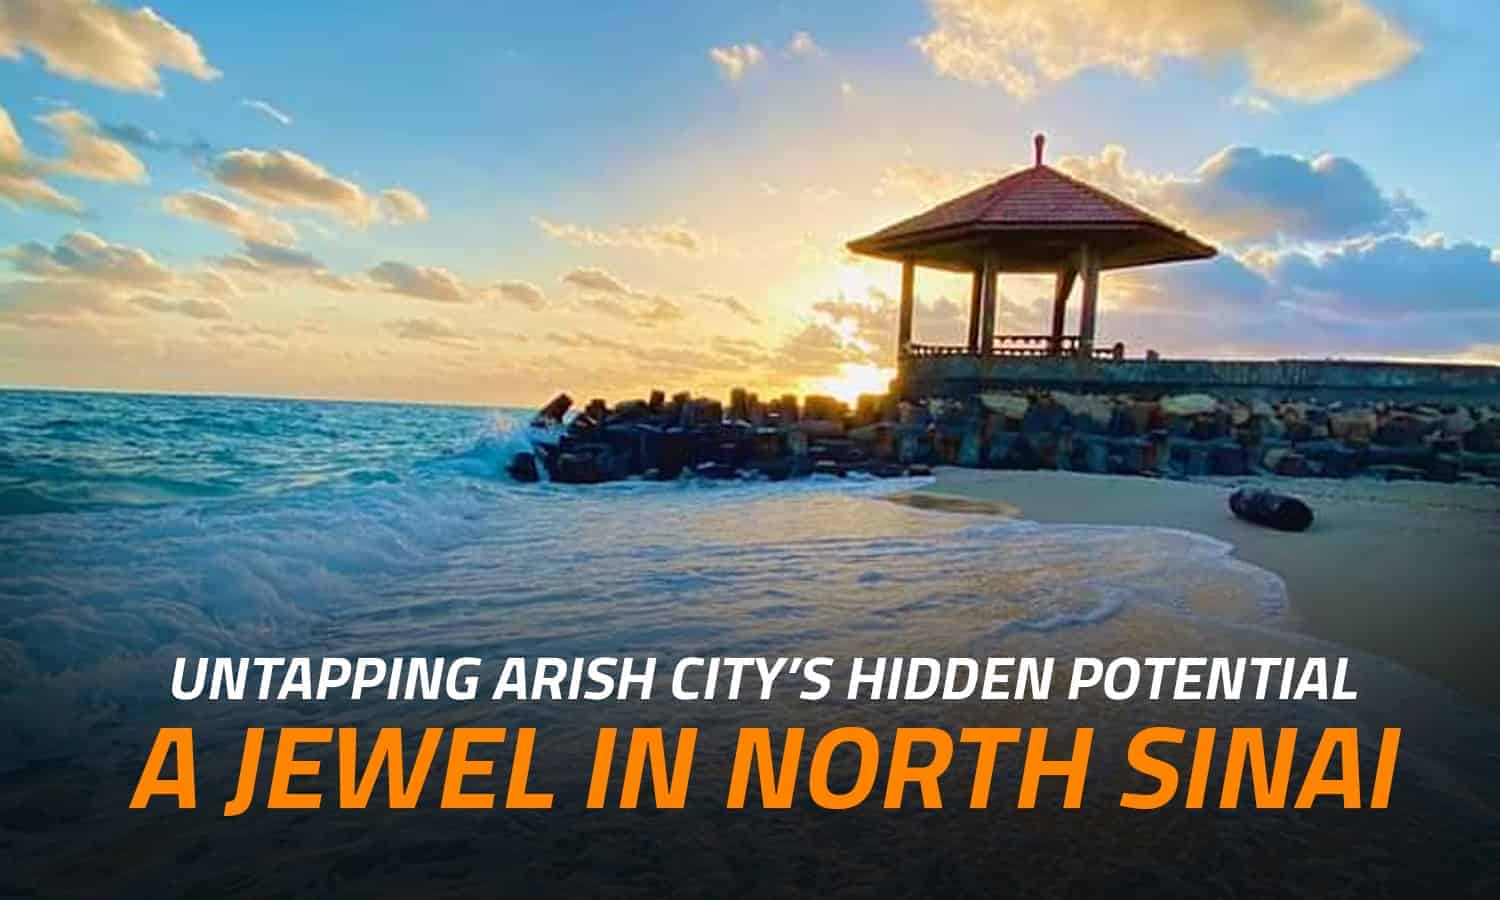 Untapping Arish City’s Hidden Potential: A Jewel in North Sinai

